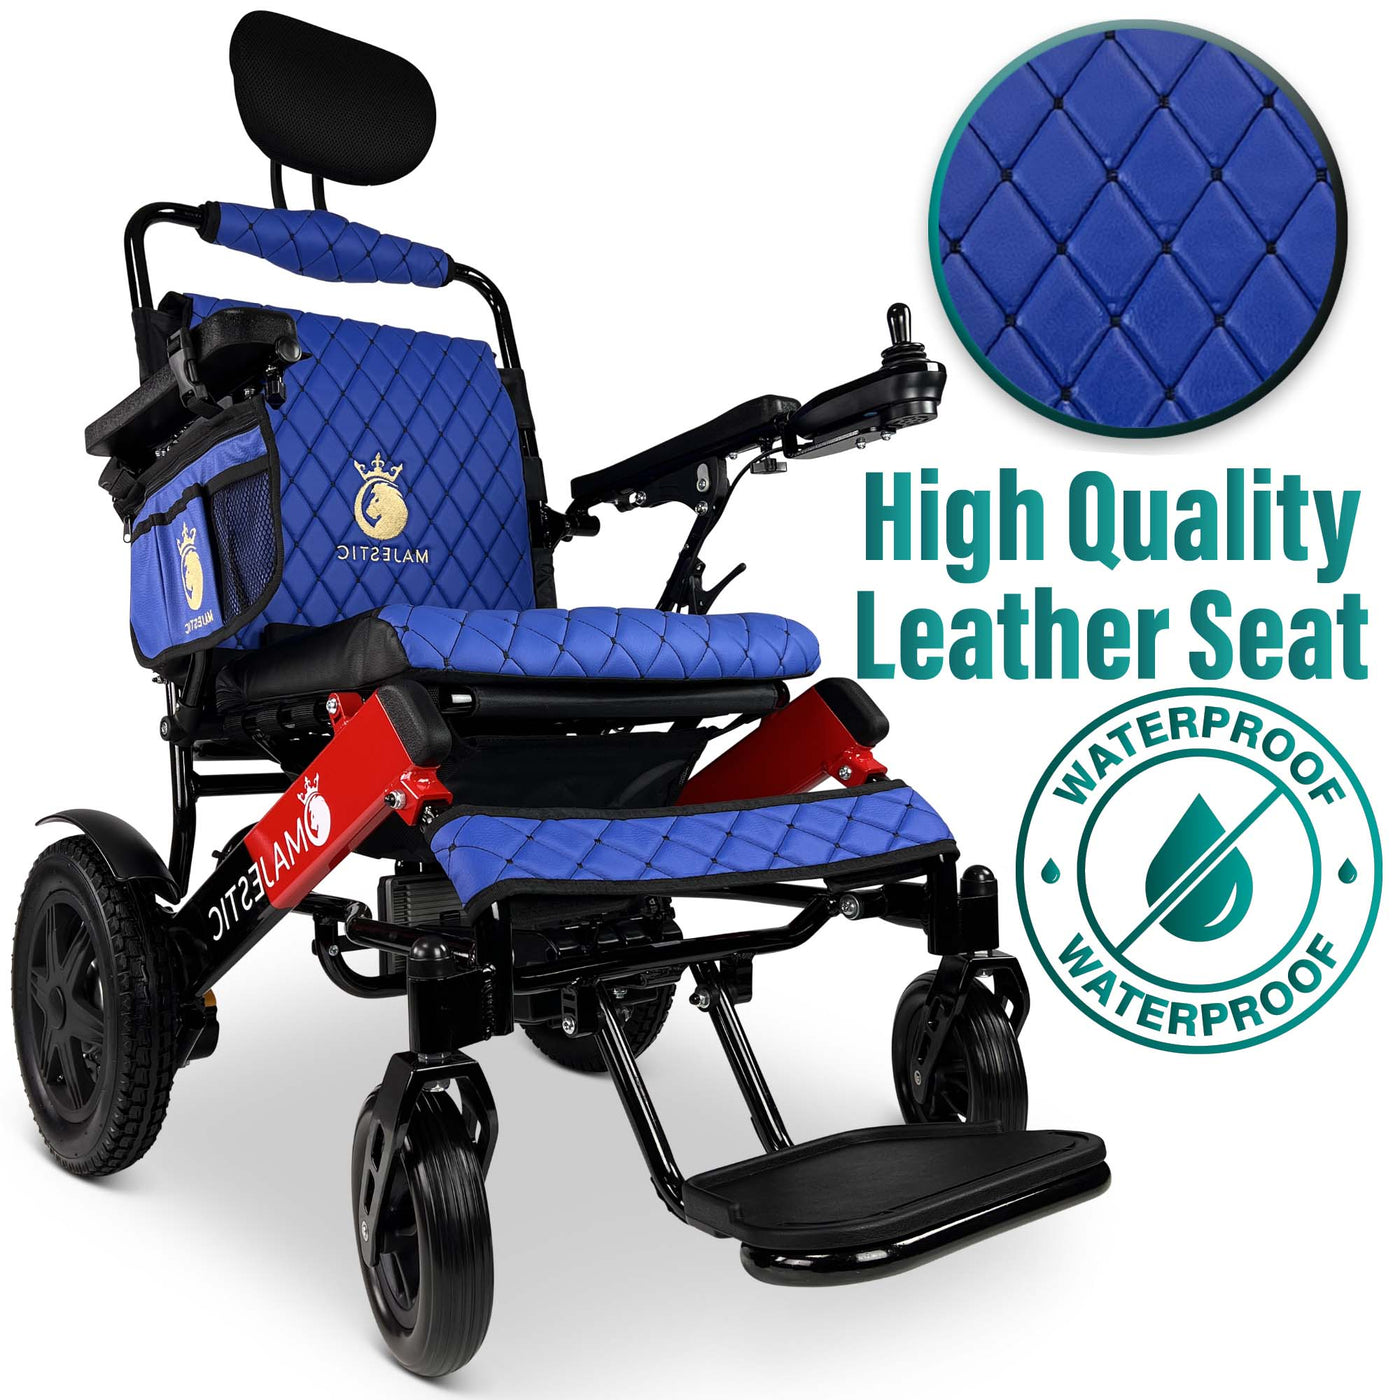 Auto Recline Electric Wheelchair Airline Approved Remote Control